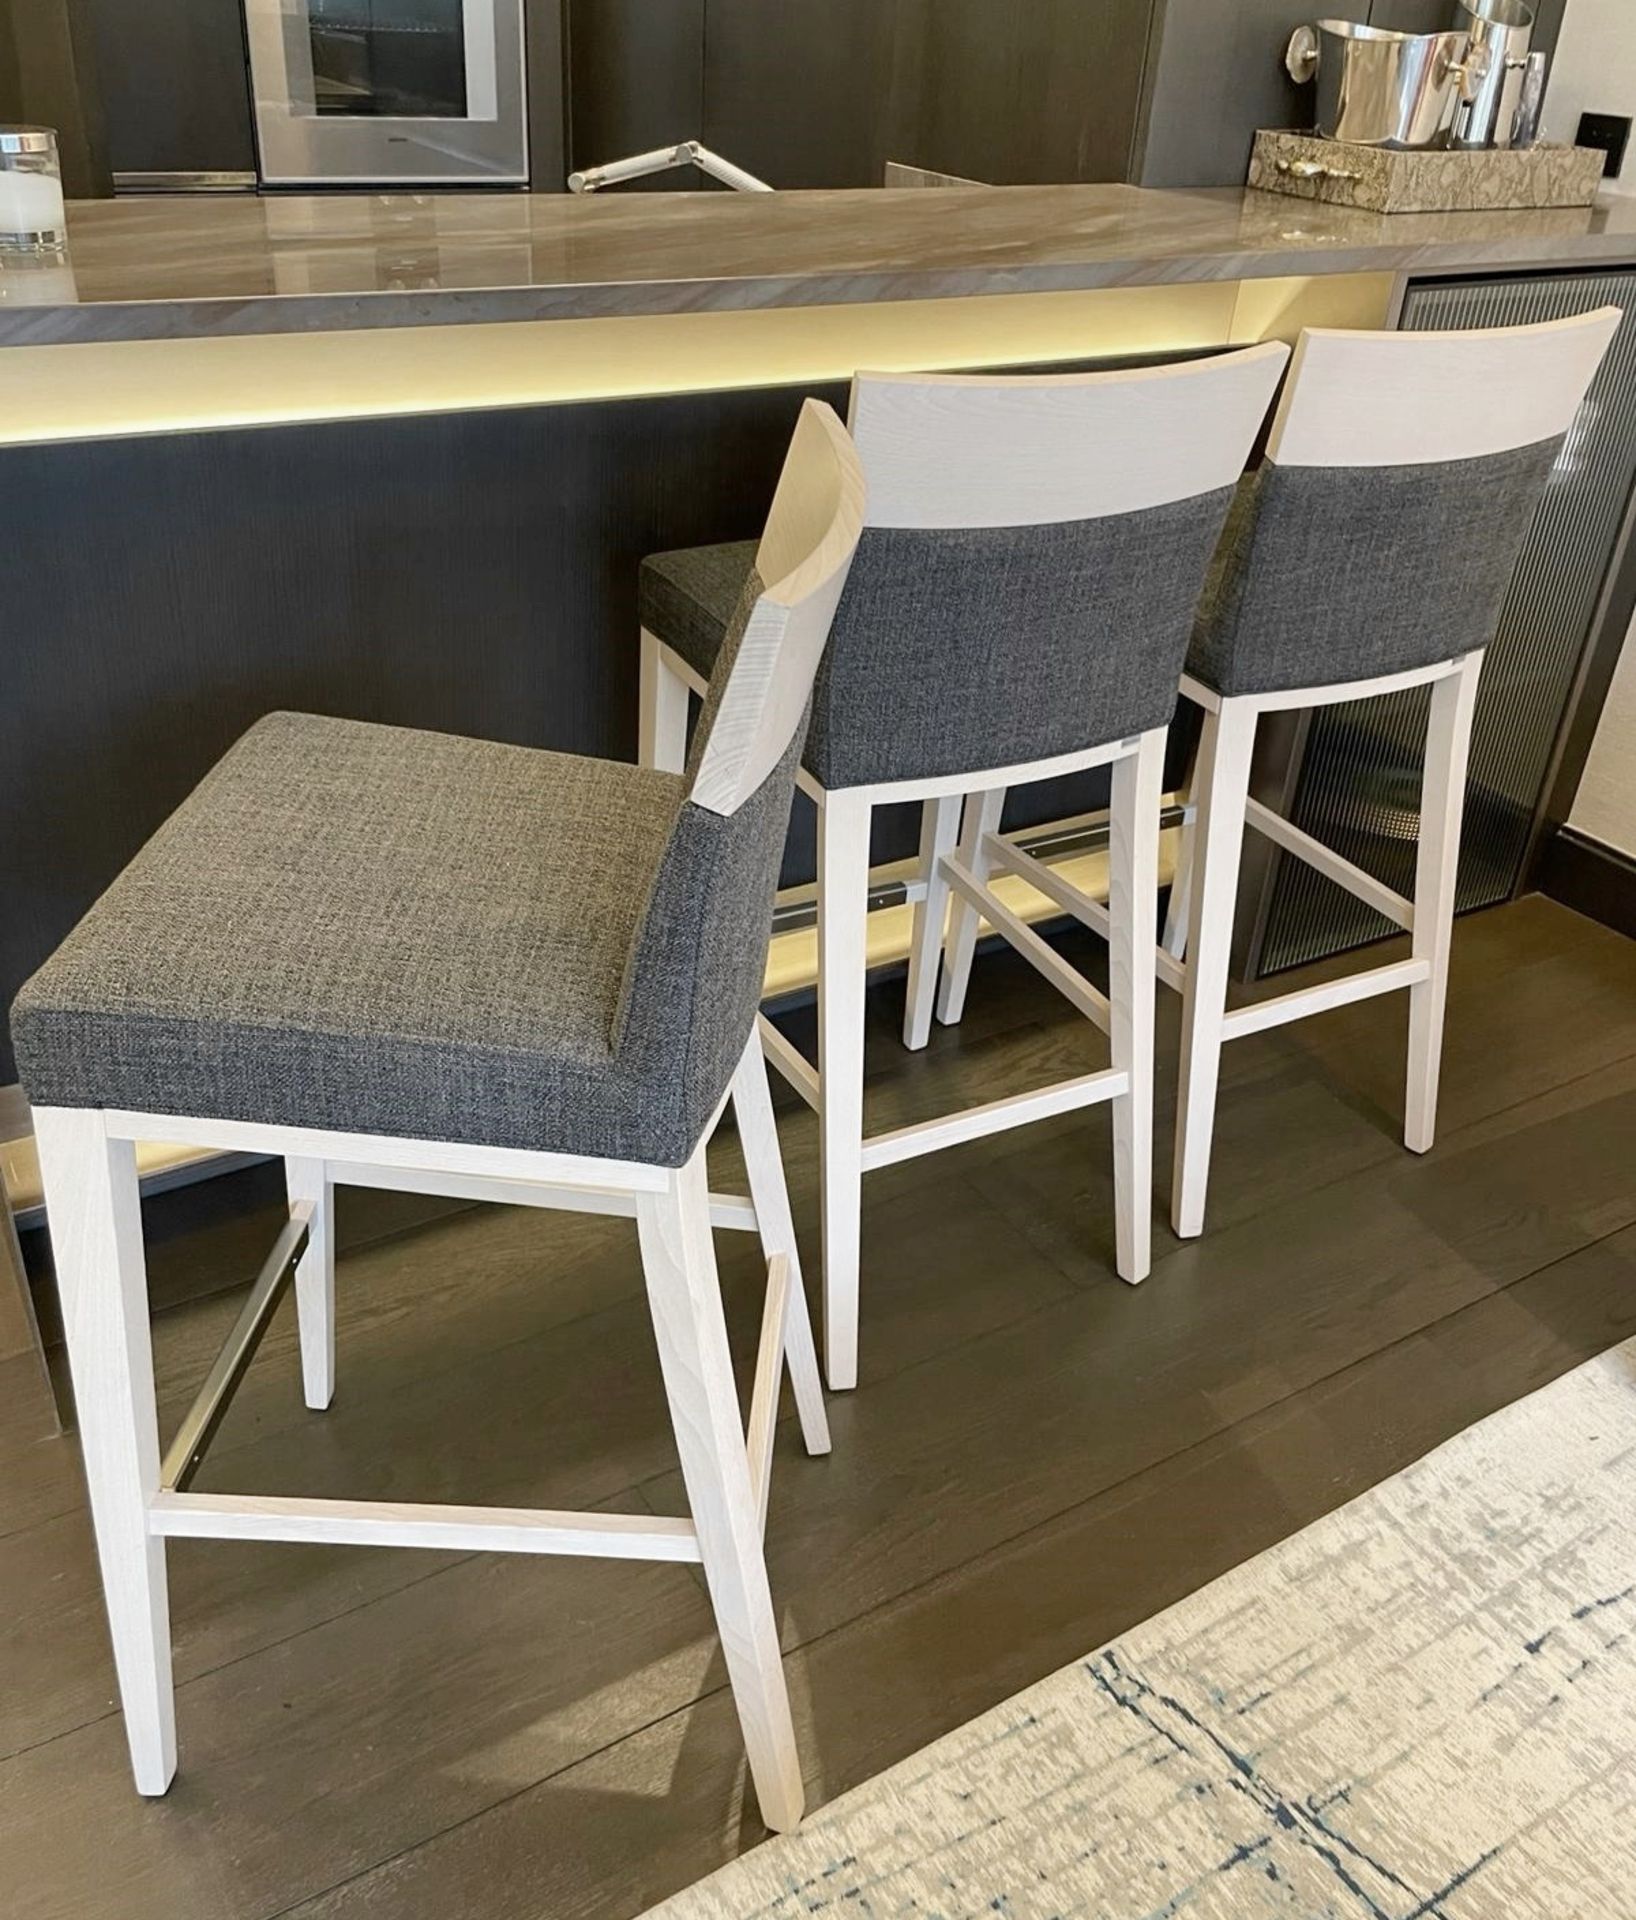 3 x MONTBEL Designer Bar Stools With Light Stained Frames And Grey Fabric Upholstery - Image 11 of 18